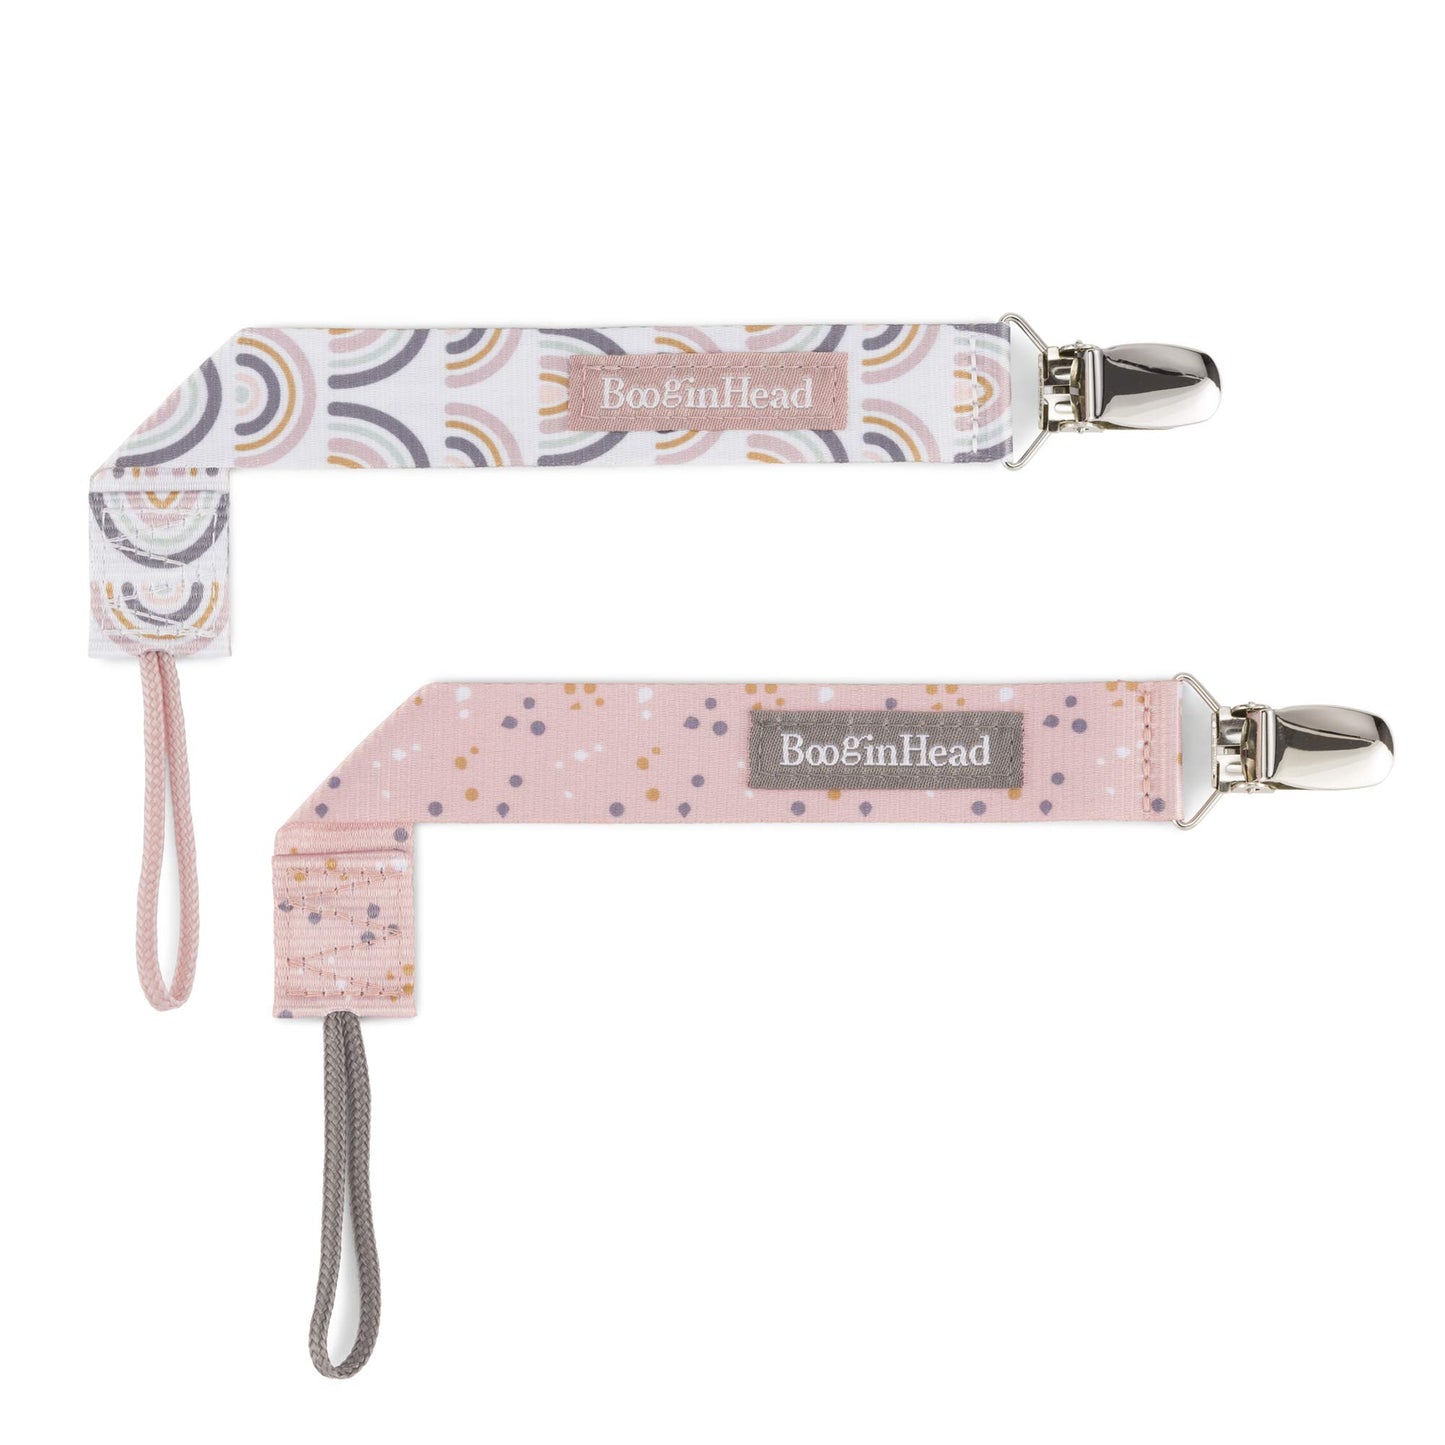 BooginHead Pacifier Clip Baby Pacifier Holder PaciGrip 3-Pack, Geometric Pink